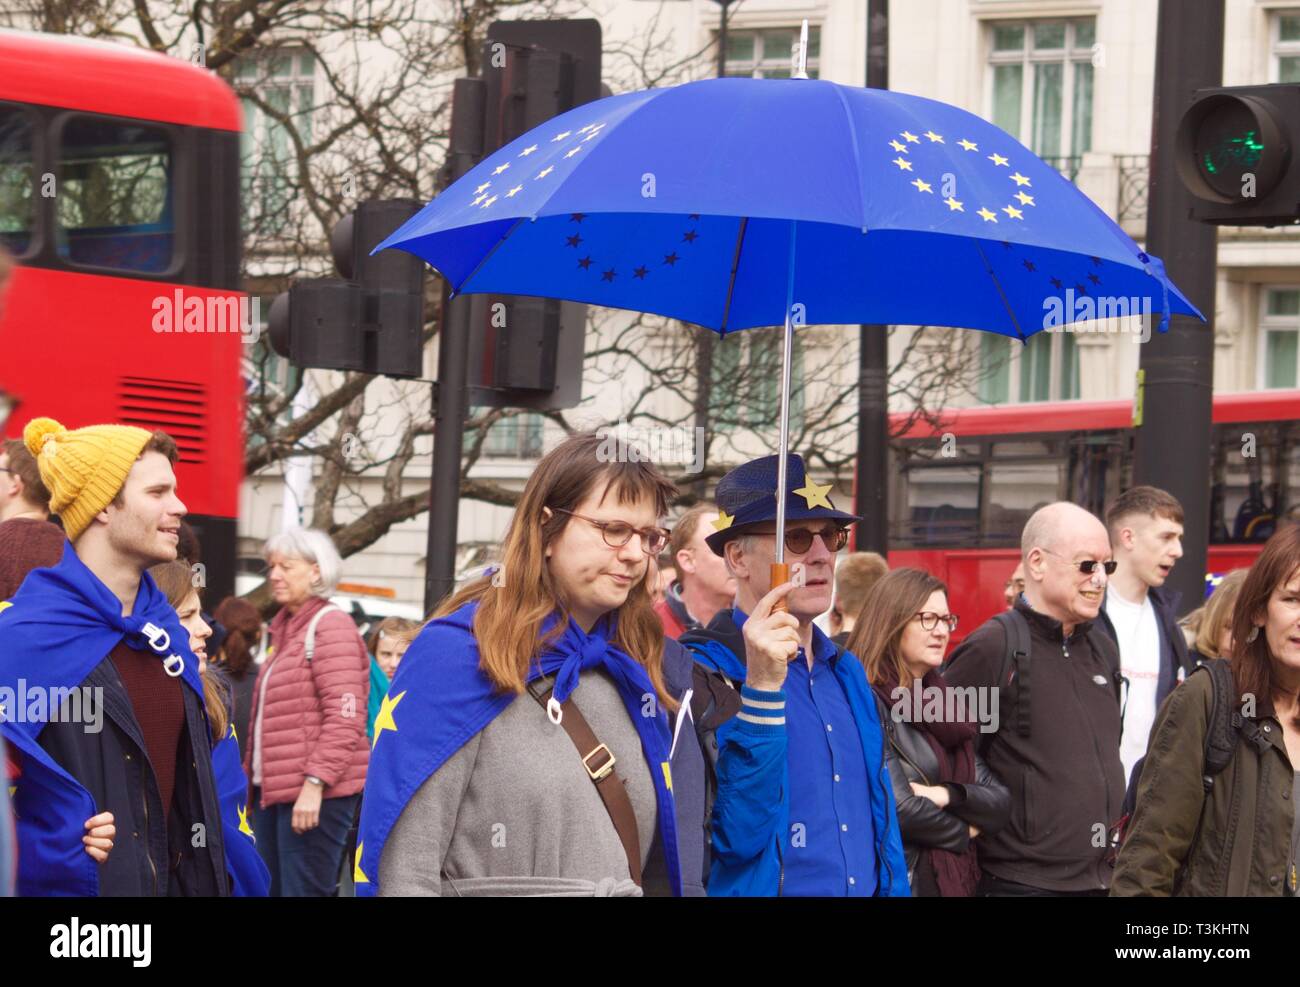 Disgruntled supporters taking part in People's Vote march on 23 March 2019 Stock Photo